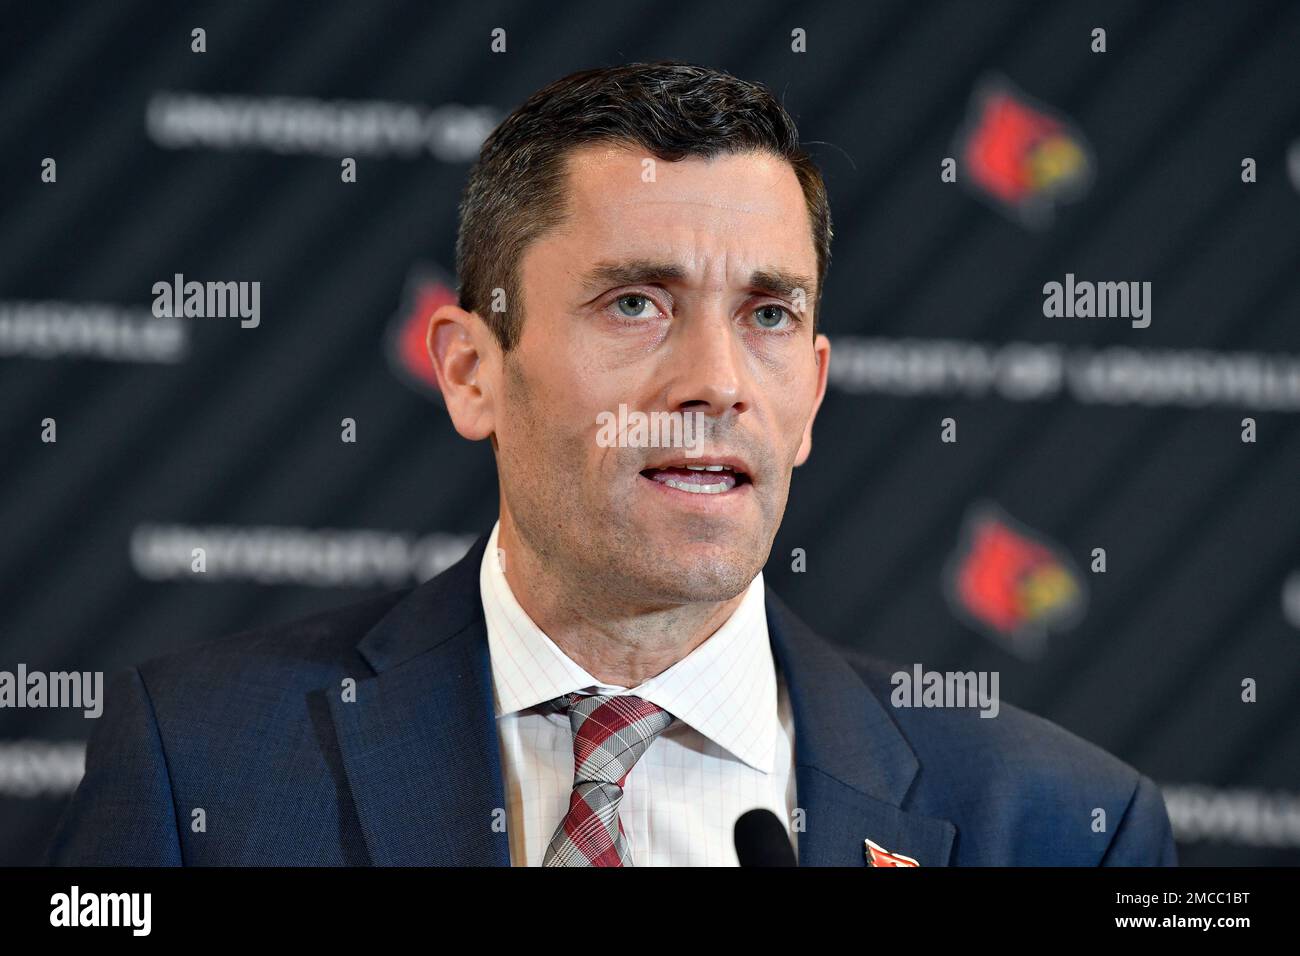 University of Louisville interim athletic director Josh Heird speaks to  reporters following a meeting of the University Board of Trustees and the  Louisville Athletic Association board, Wednesday, Jan. 26, 2022, in  Louisville